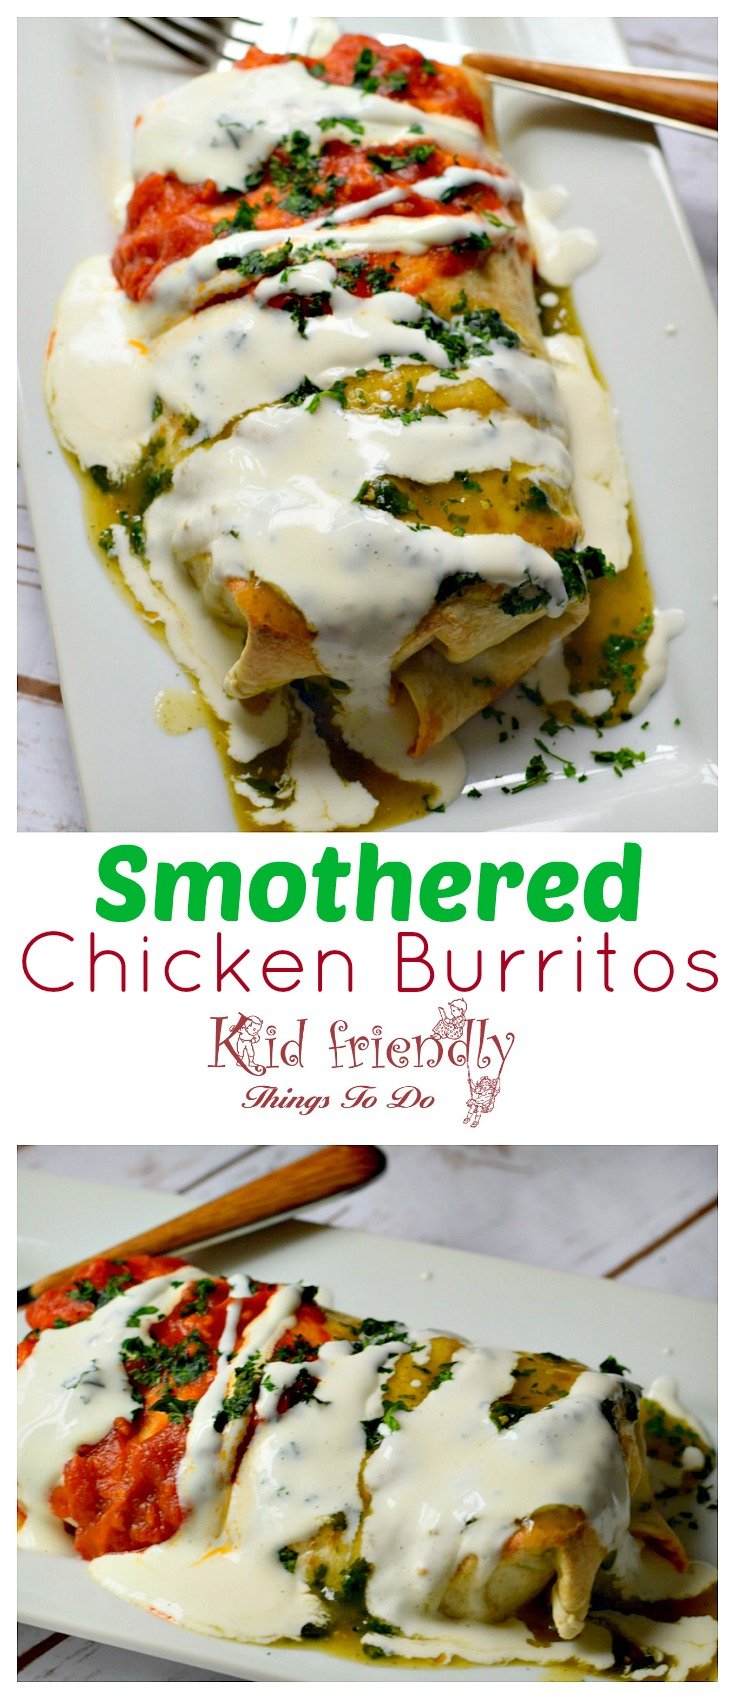 Easy Baked Smothered Chicken with Rice and Avocado Burrito Recipe - Perfect for family dinner or cinco de mayo mexican dinner - www.kidfriendlythingstodo.com